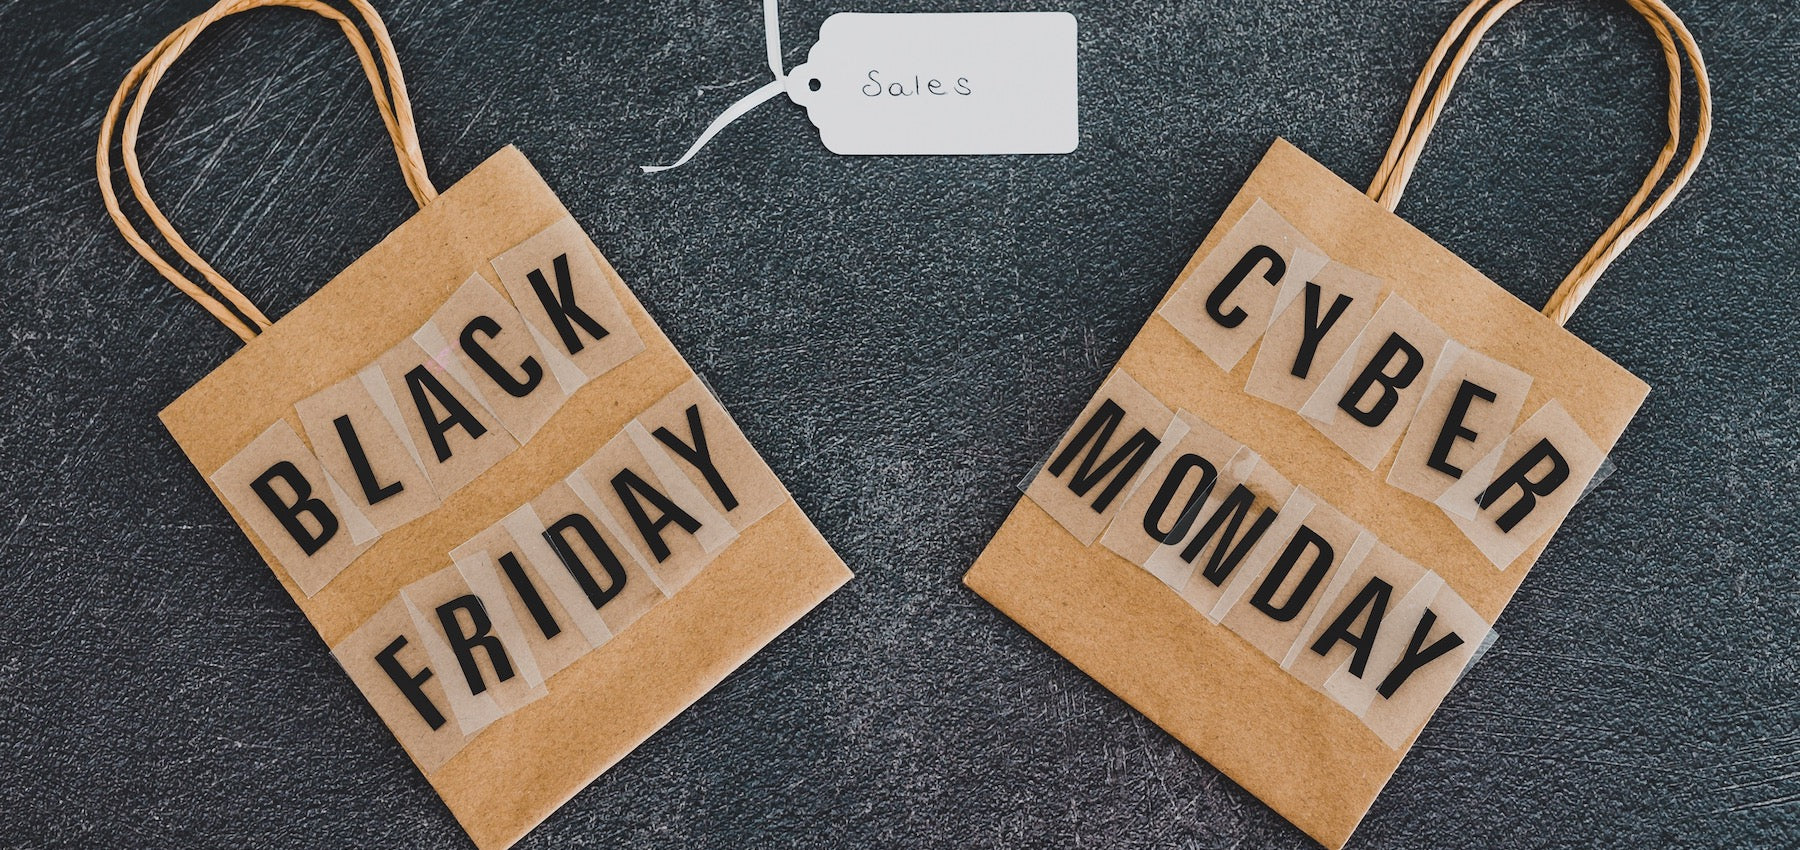 Where to Find the Best Black Friday and Cyber Monday Deals for Skincare